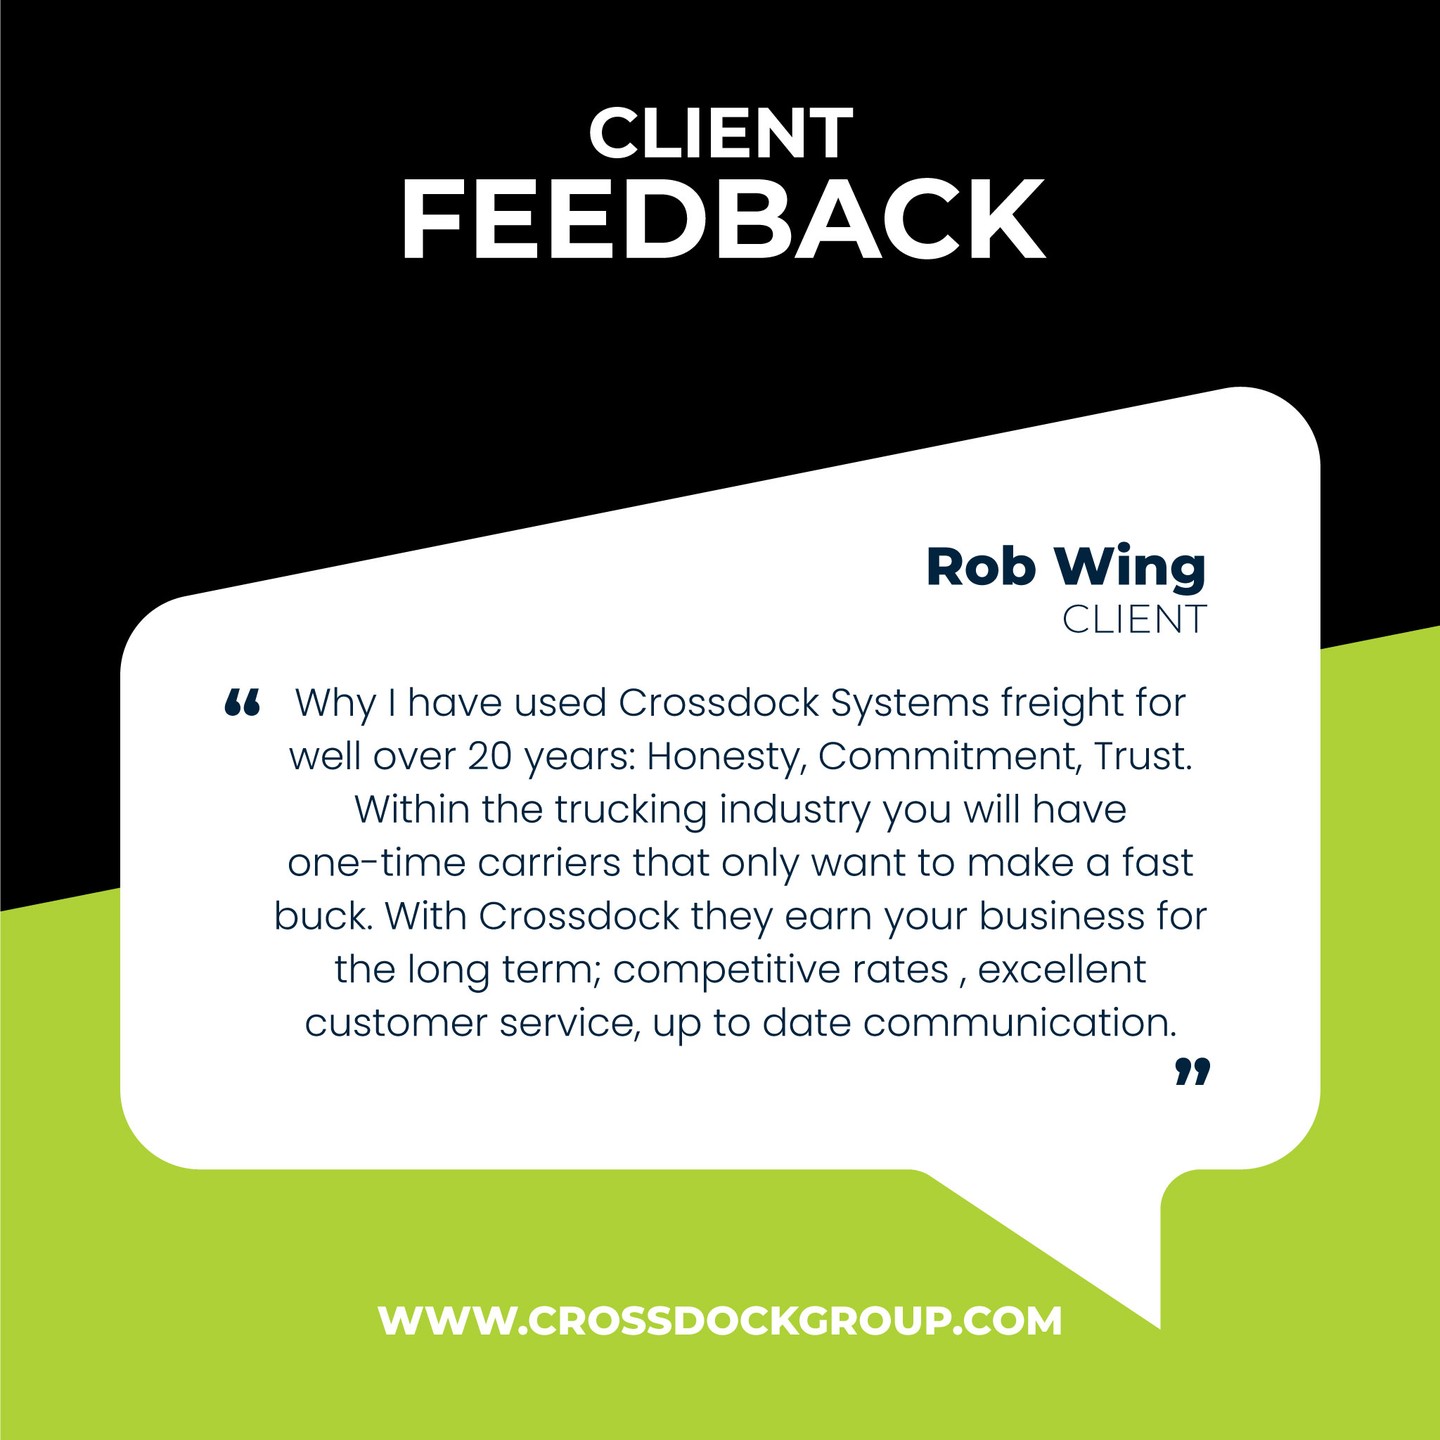 After being in business for more than 20 years, you could say we're in it for the long haul. Thanks for the positive feedback Rob! We look forward to working with you to Get It. Delivered. 

#HappyCustomer
#CustomerTestimonial
#LoveOurCustomers
#FeedbackFriday
#ClientLove
#TestimonialTuesday
#CustomerExperience
#SatisfiedCustomer
#FiveStarReview
#CustomerAppreciation